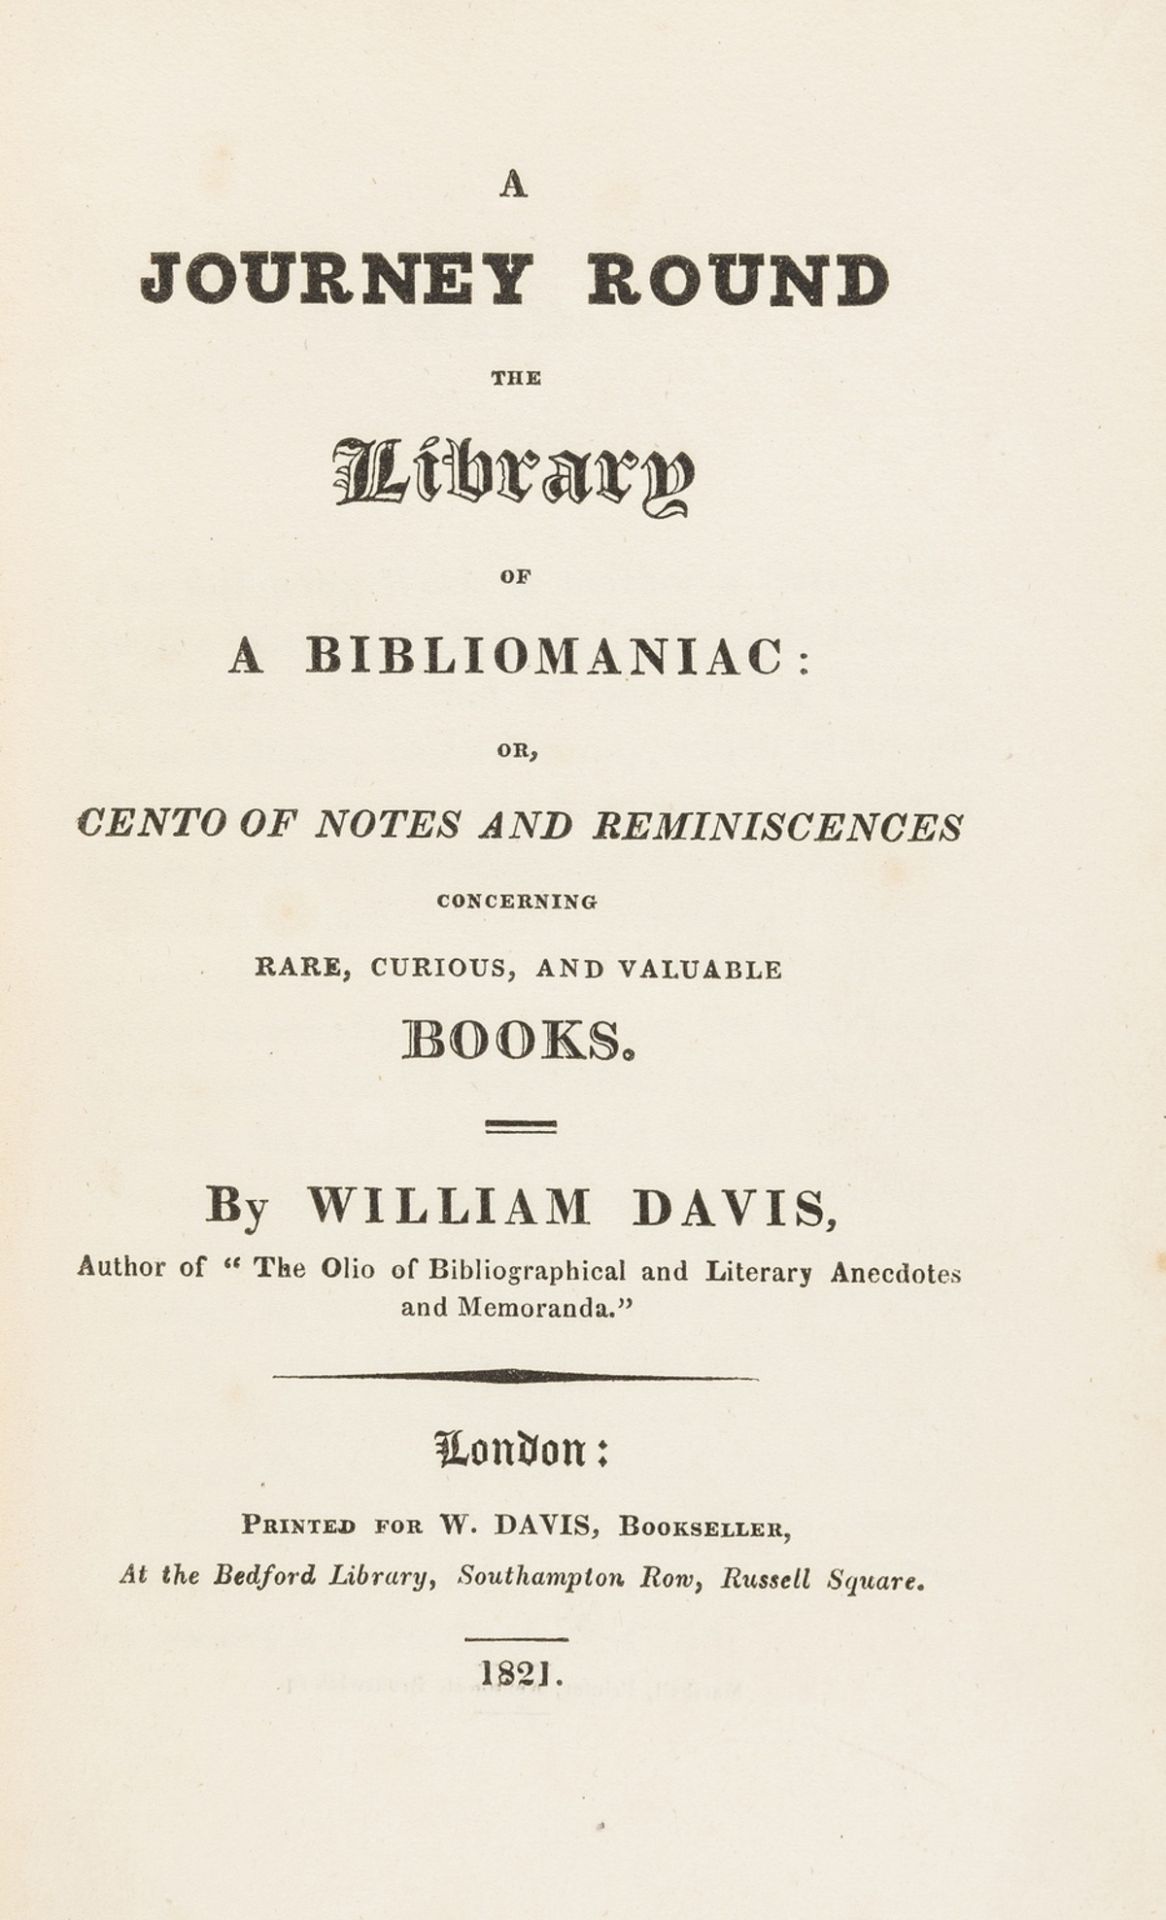 Davis (William) A Journey Round the Library of a Bibliomaniac, first edition, 1821 & others (3)